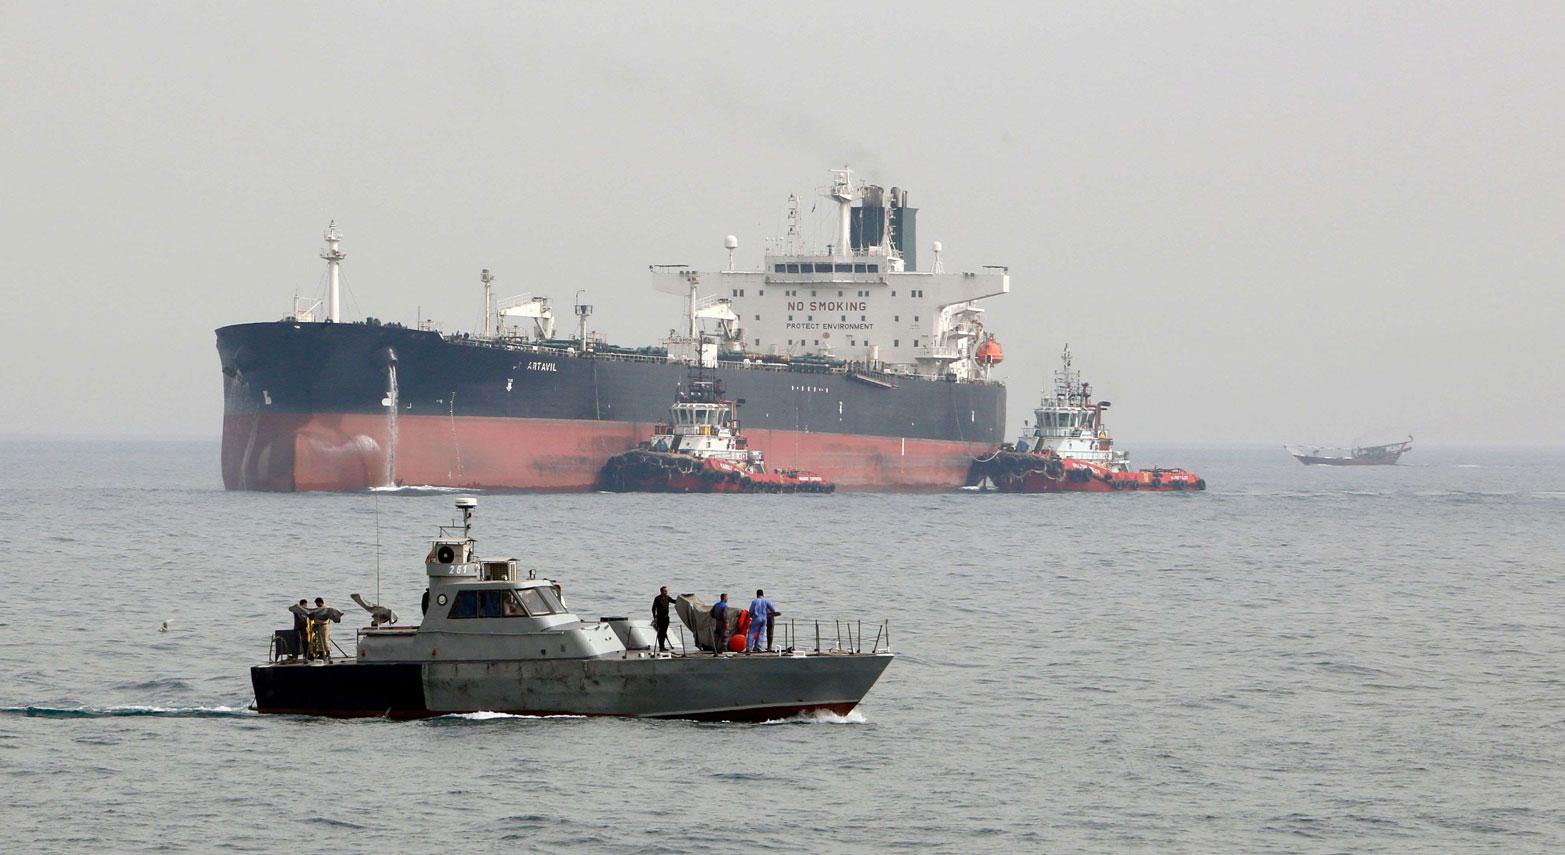 Iranian military speedboat patrols the waters as a tanker prepares to dock